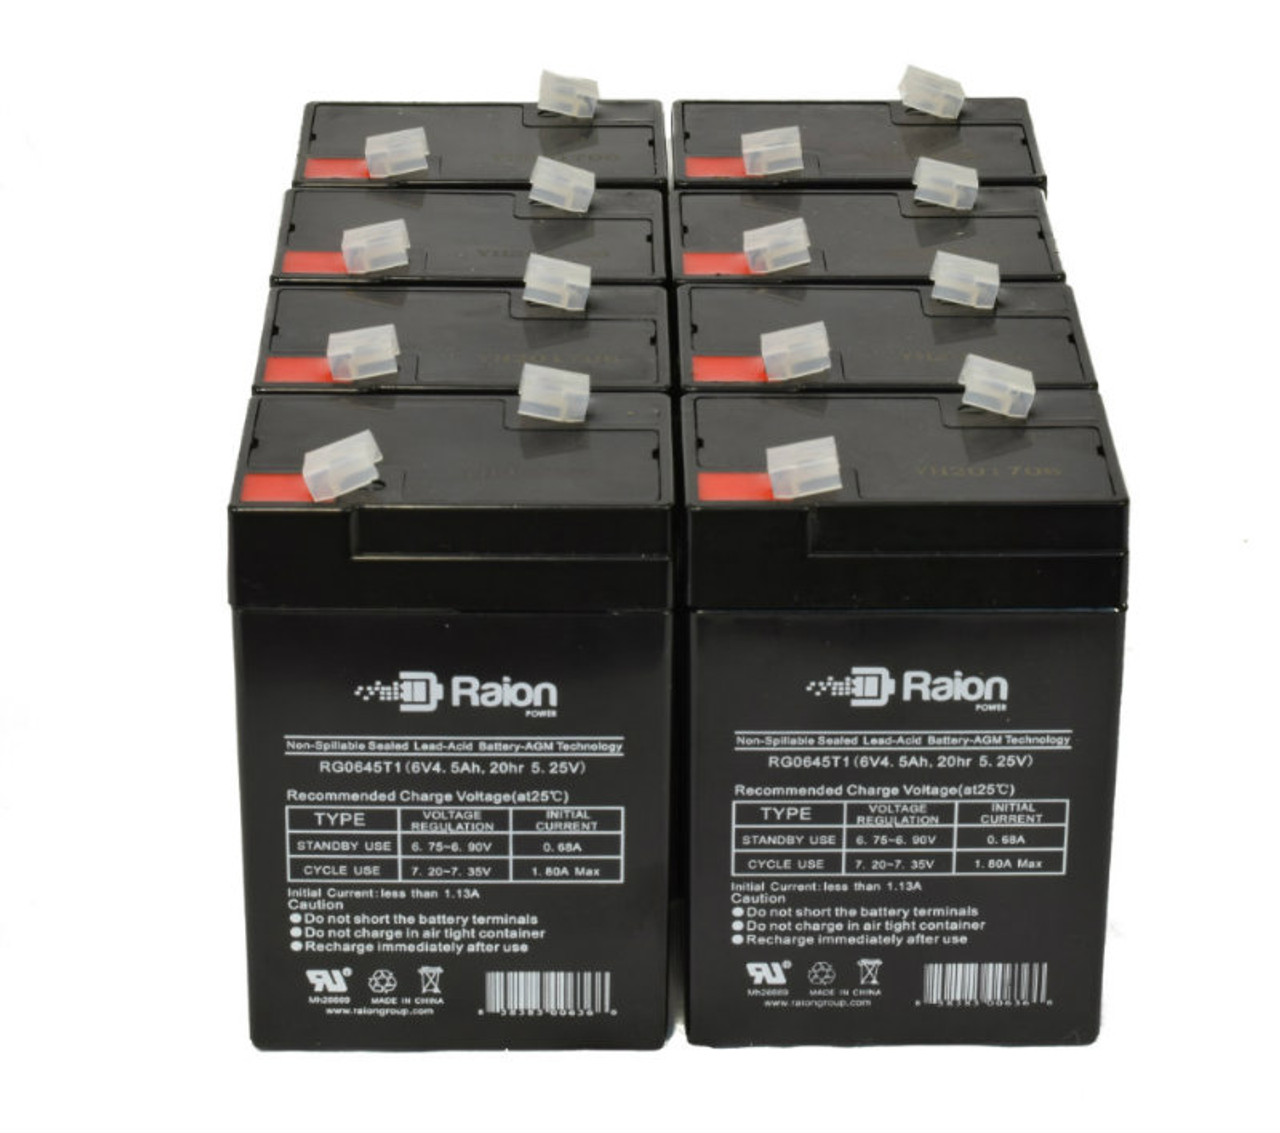 Raion Power 6 Volt 4.5Ah RG0645T1 Replacement Battery for Kaiying KS4.5-6 - 8 Pack